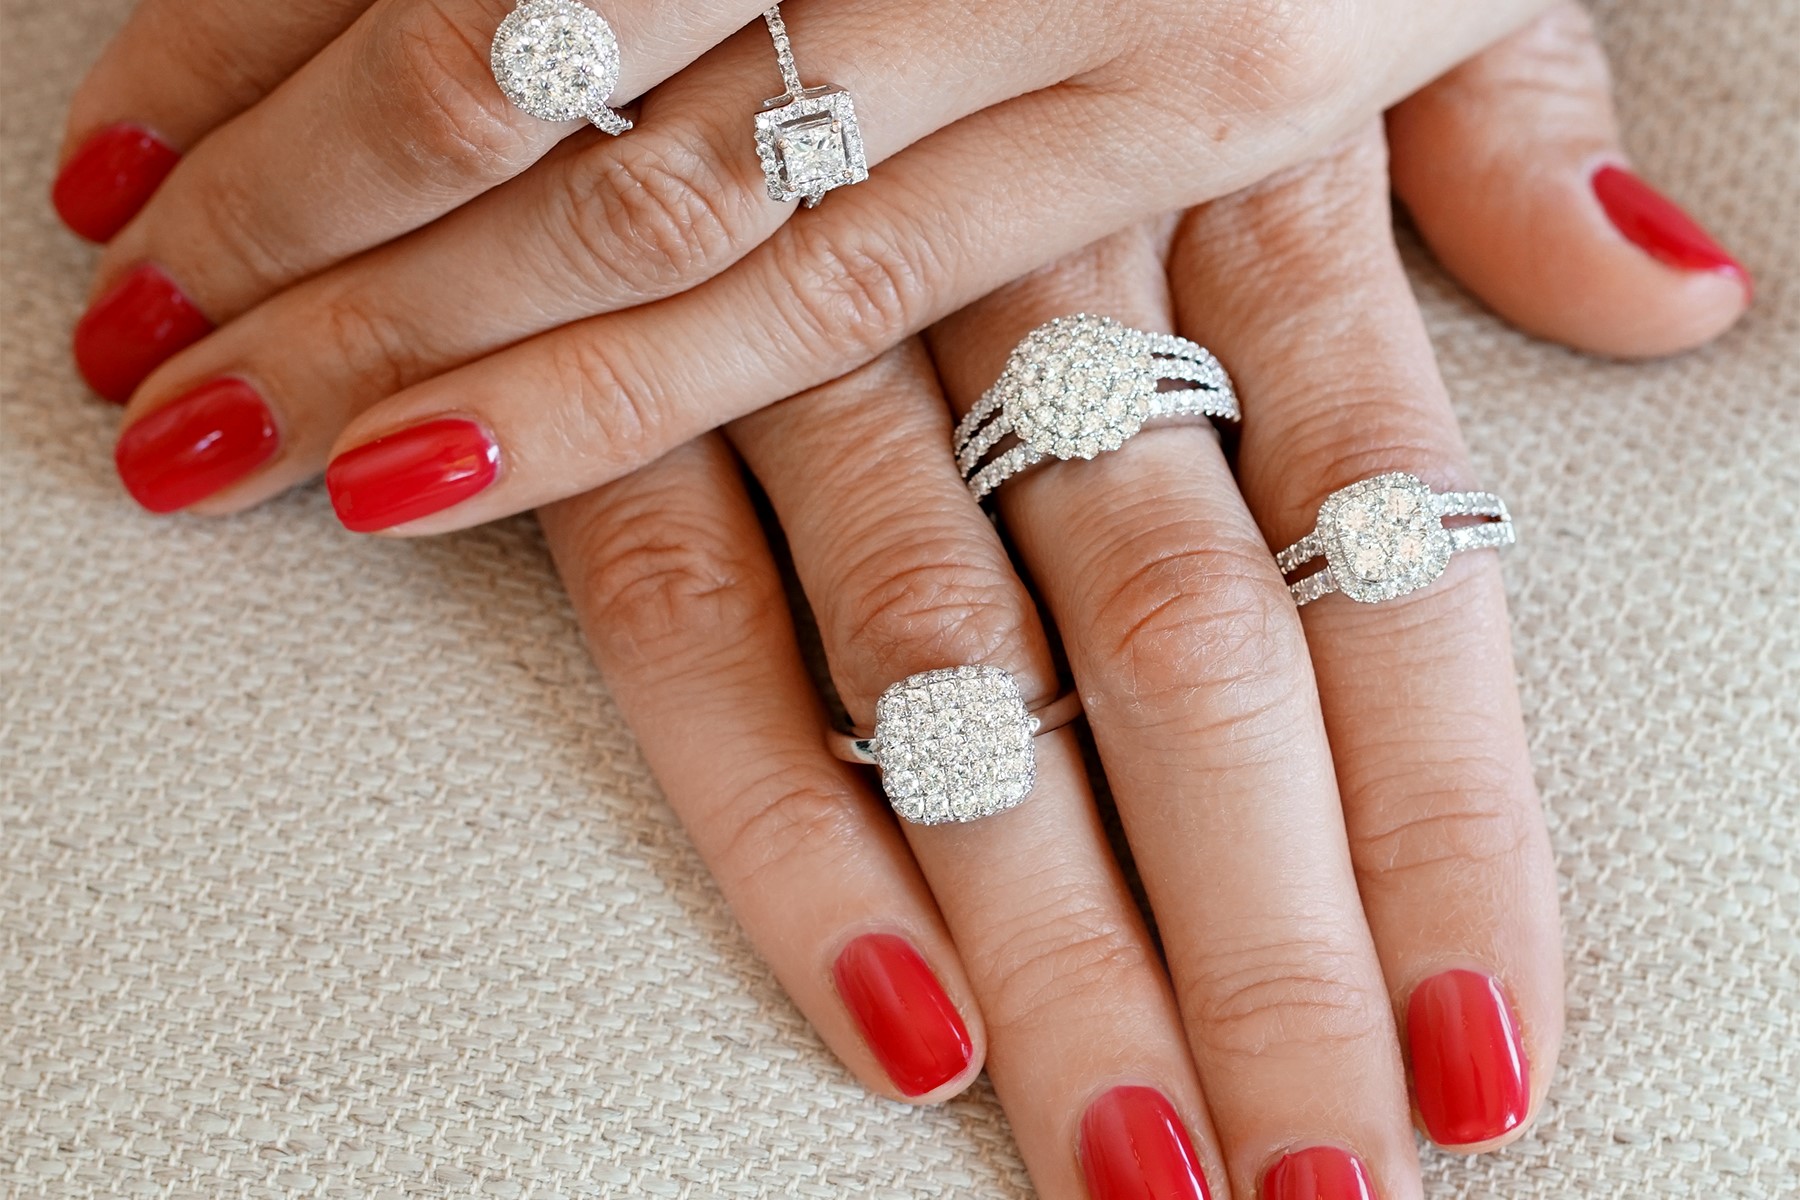 7 Tips For Choosing The Best Engagement Rings For Active Women